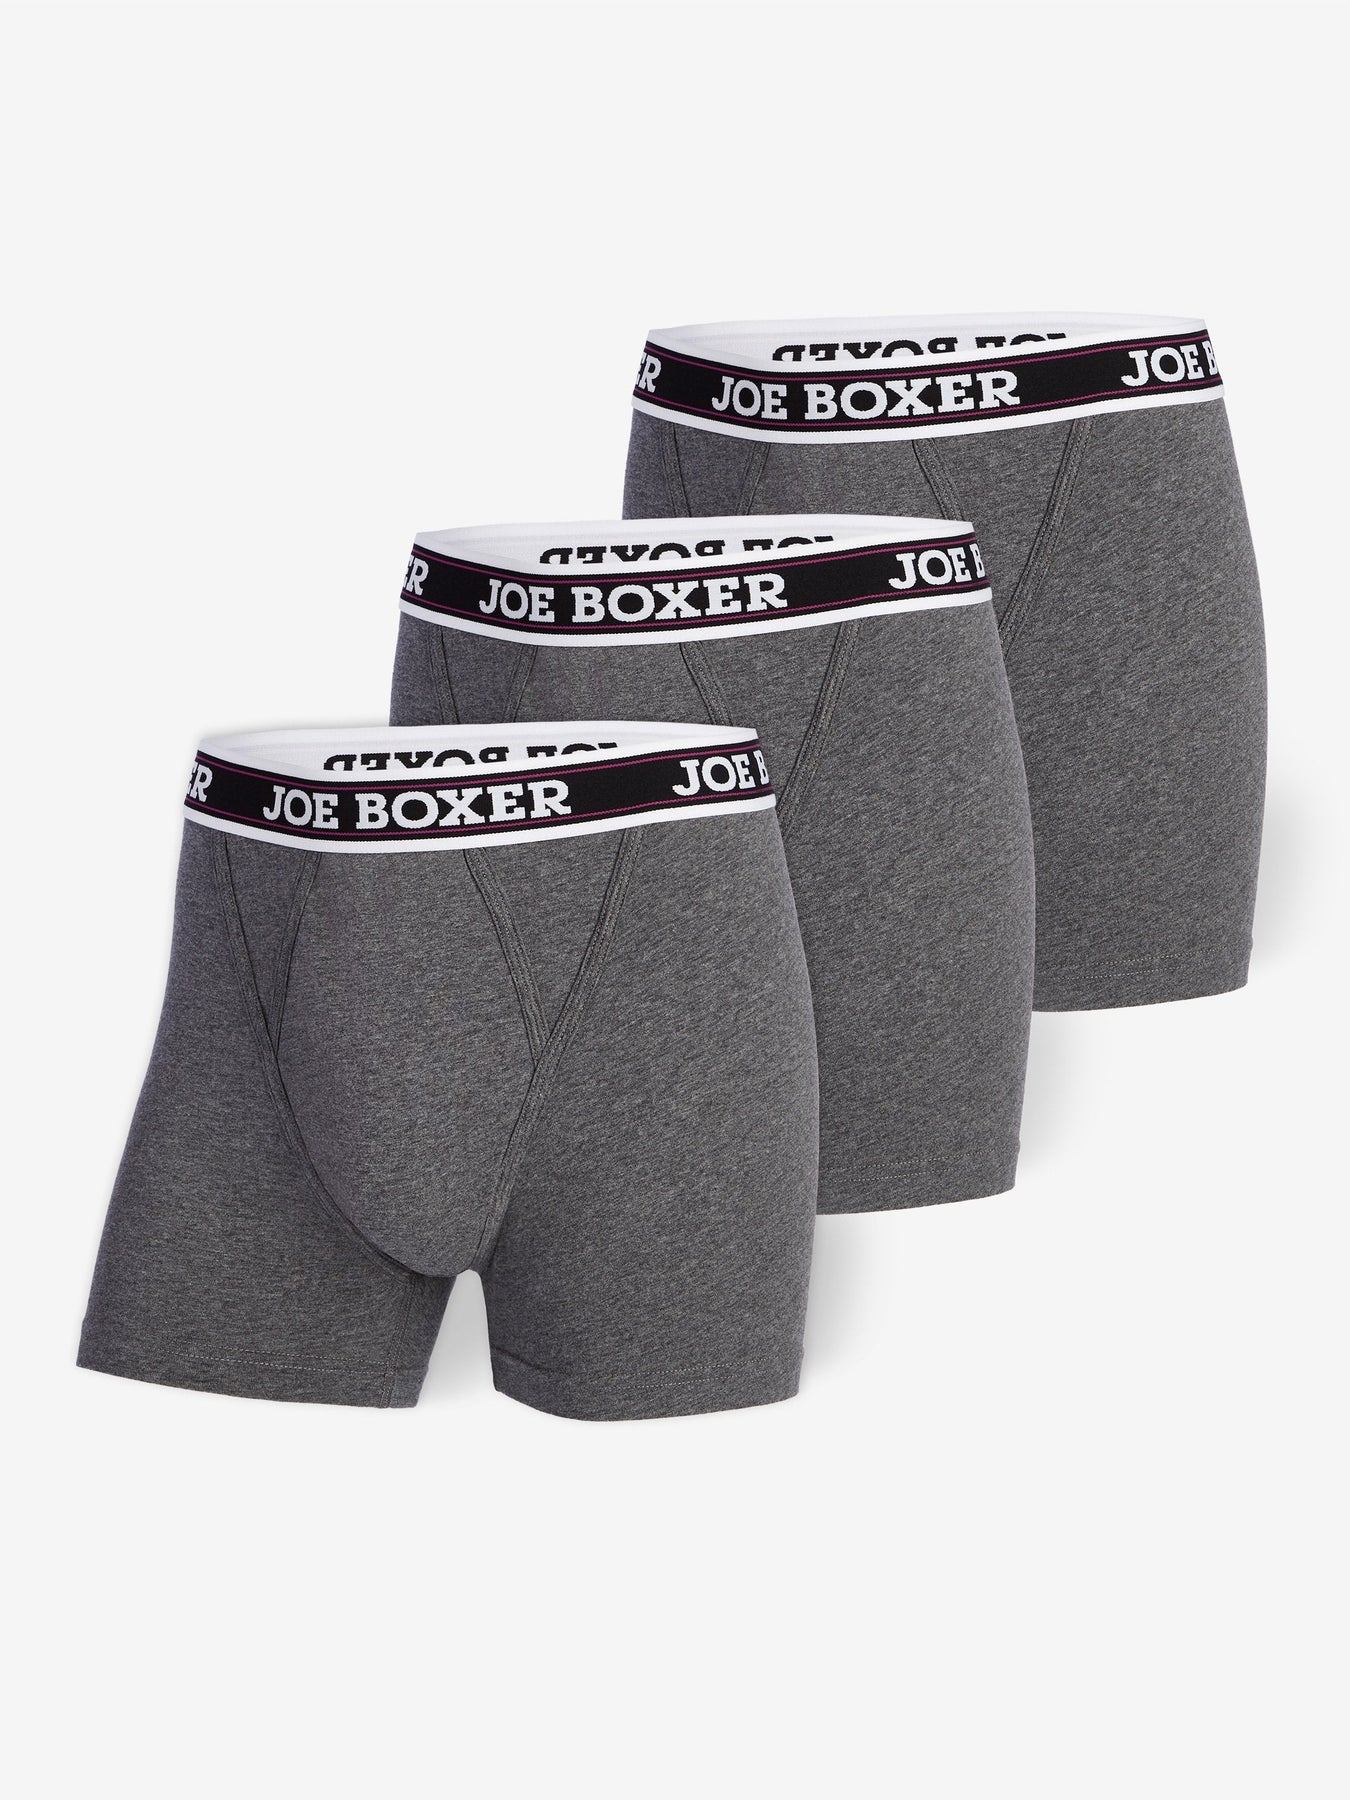 https://cdn.shopify.com/s/files/1/0175/8822/products/BOXER_FITTED_MODERN_STRETCH_MULTIPACKS_PACK-OF-3_OFF_GREY_b5fa4e1c-921b-47d0-bc86-4356c47e50ac_1800x1800.jpg?v=1606495124